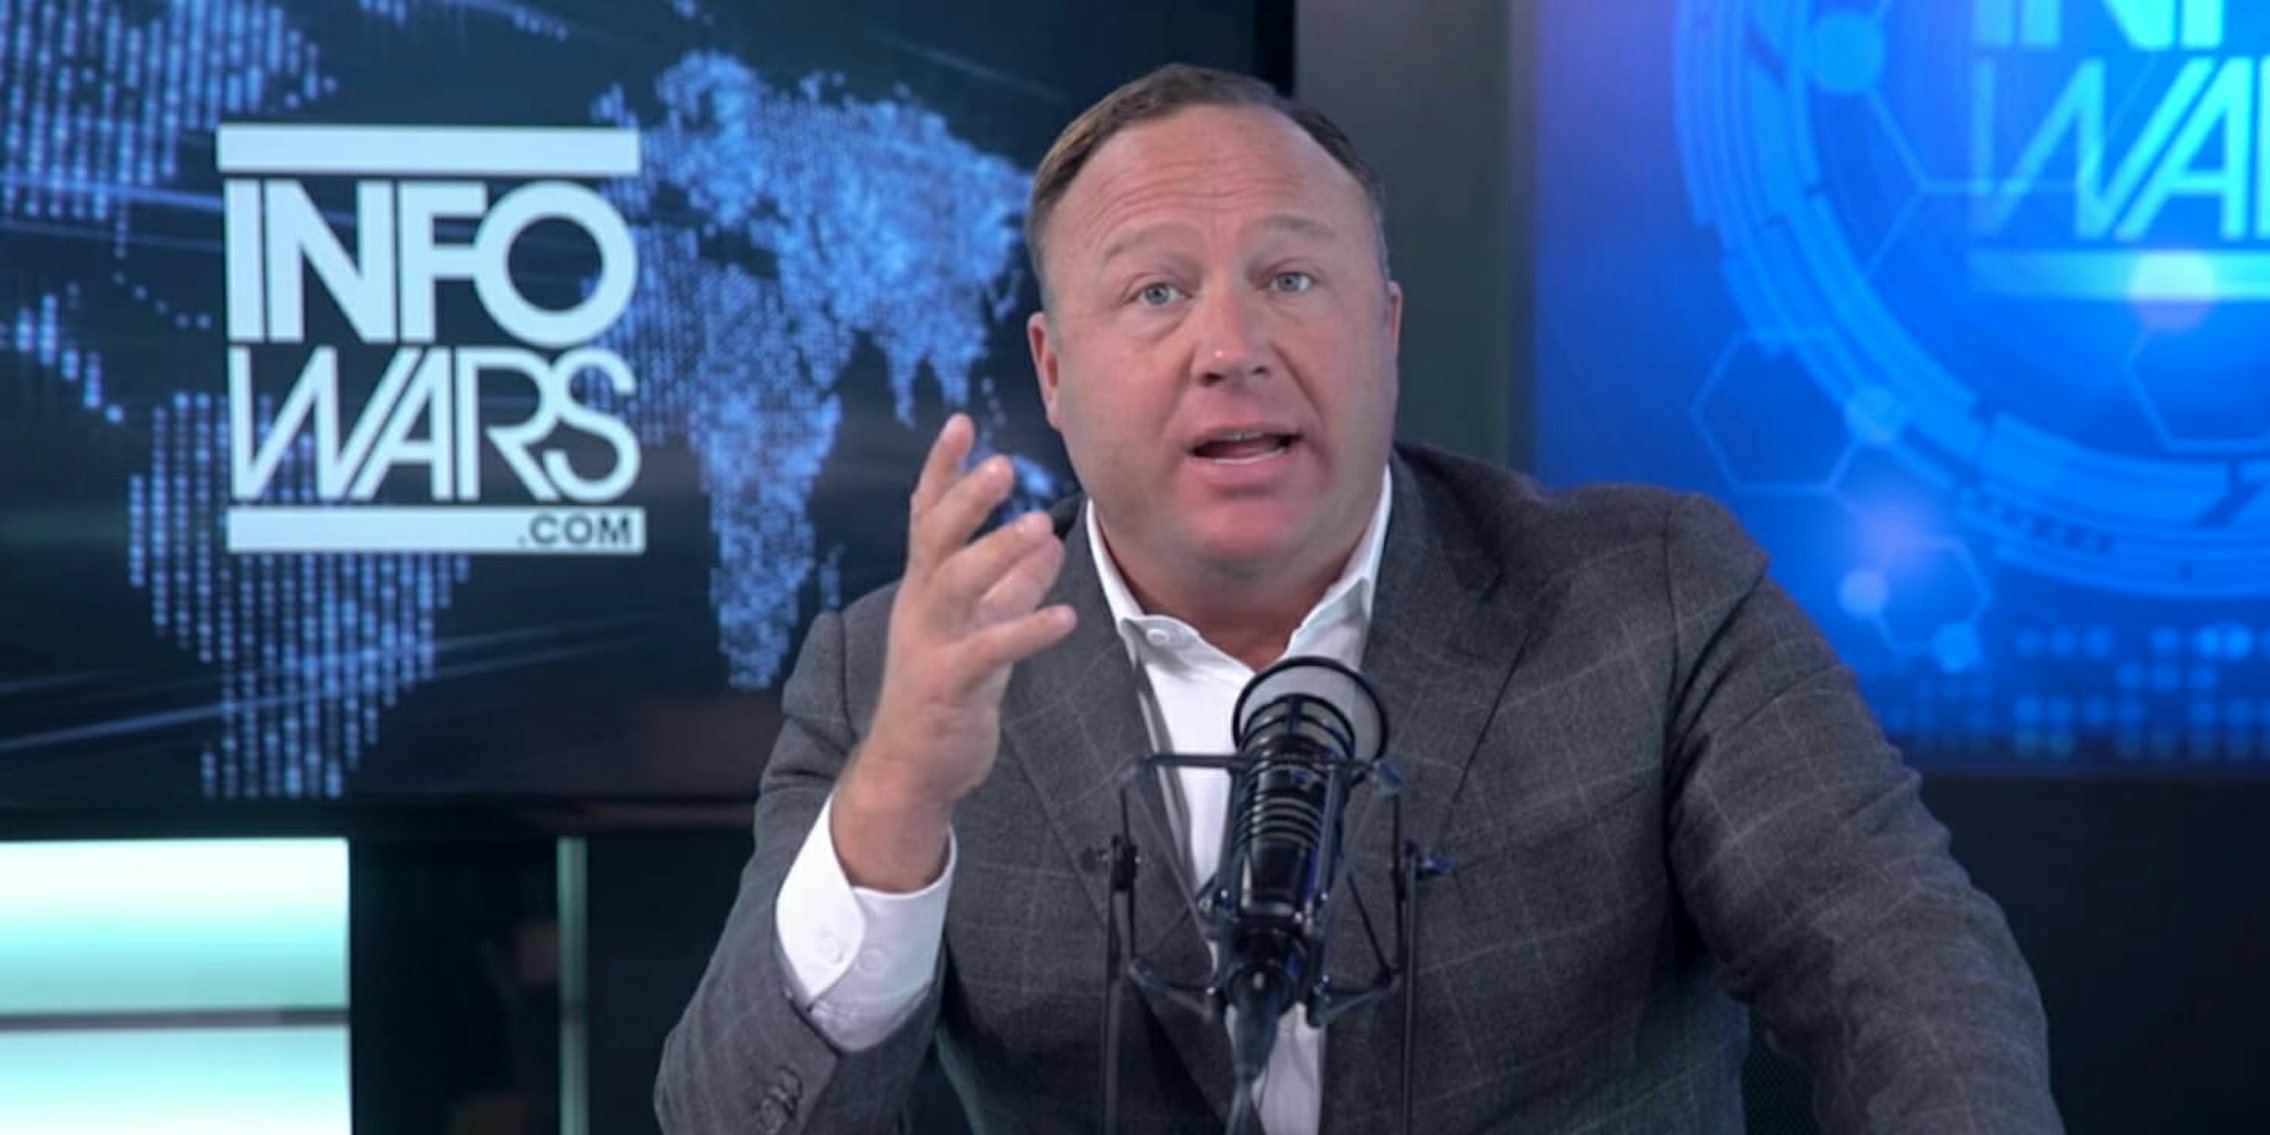 Parents of children killed in the Sandy Hook shooting are reportedly suing Alex Jones and InfoWars.